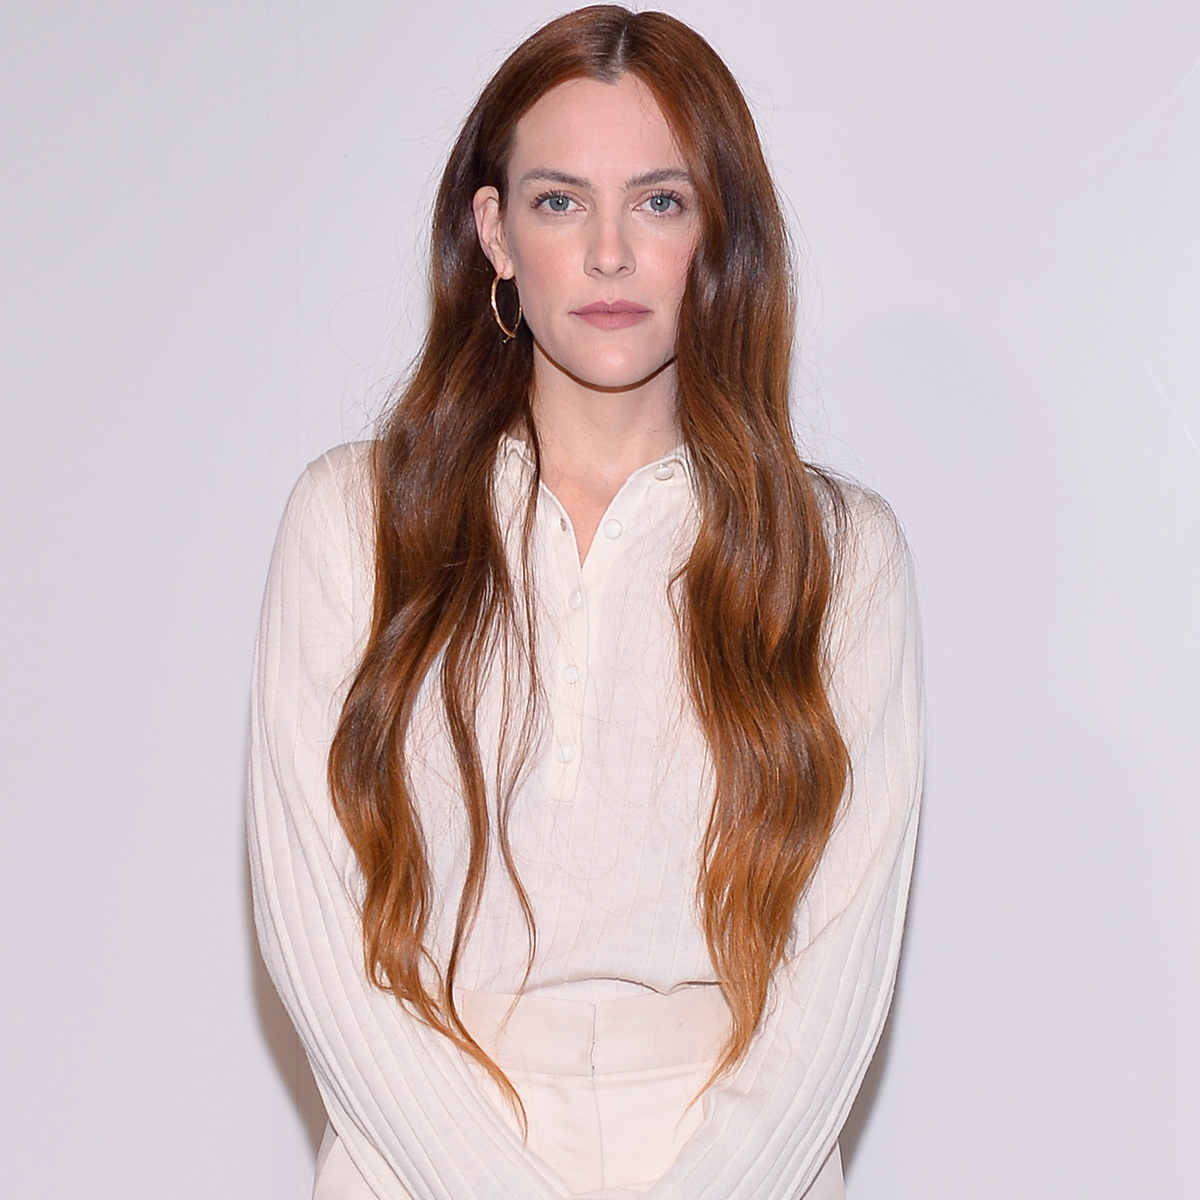 Riley Keough Slams “Fraudulent” Attempt to Sell Graceland Property